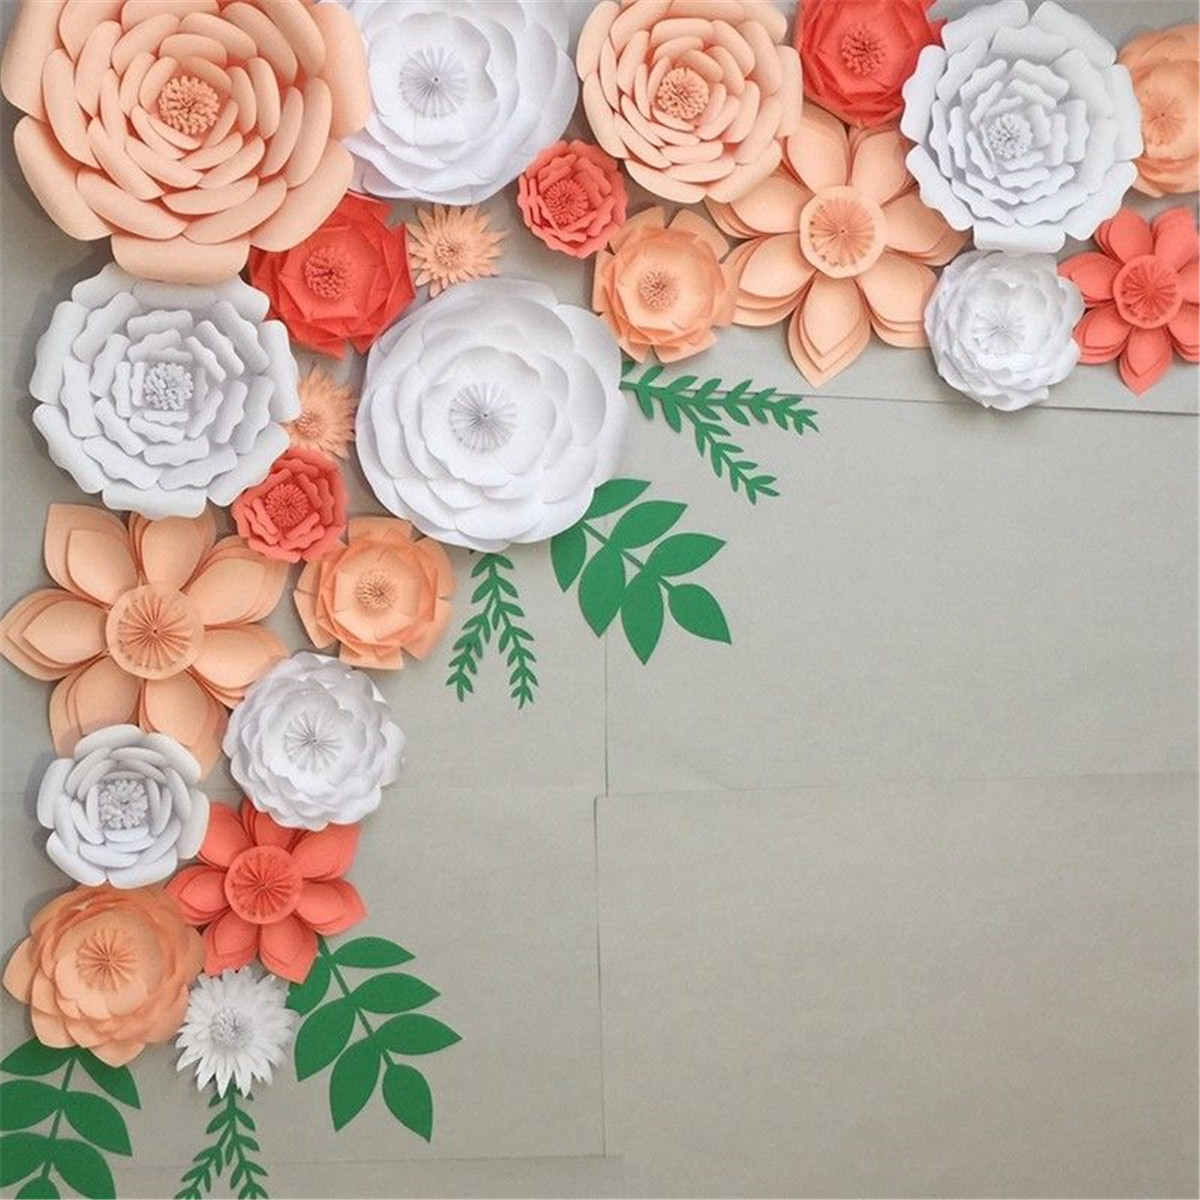 30cm-DIY-Paper-Flowers-Leaves-Backdrop-Decorations-Kid-Birthday-Party-Wedding-Favor-1339018